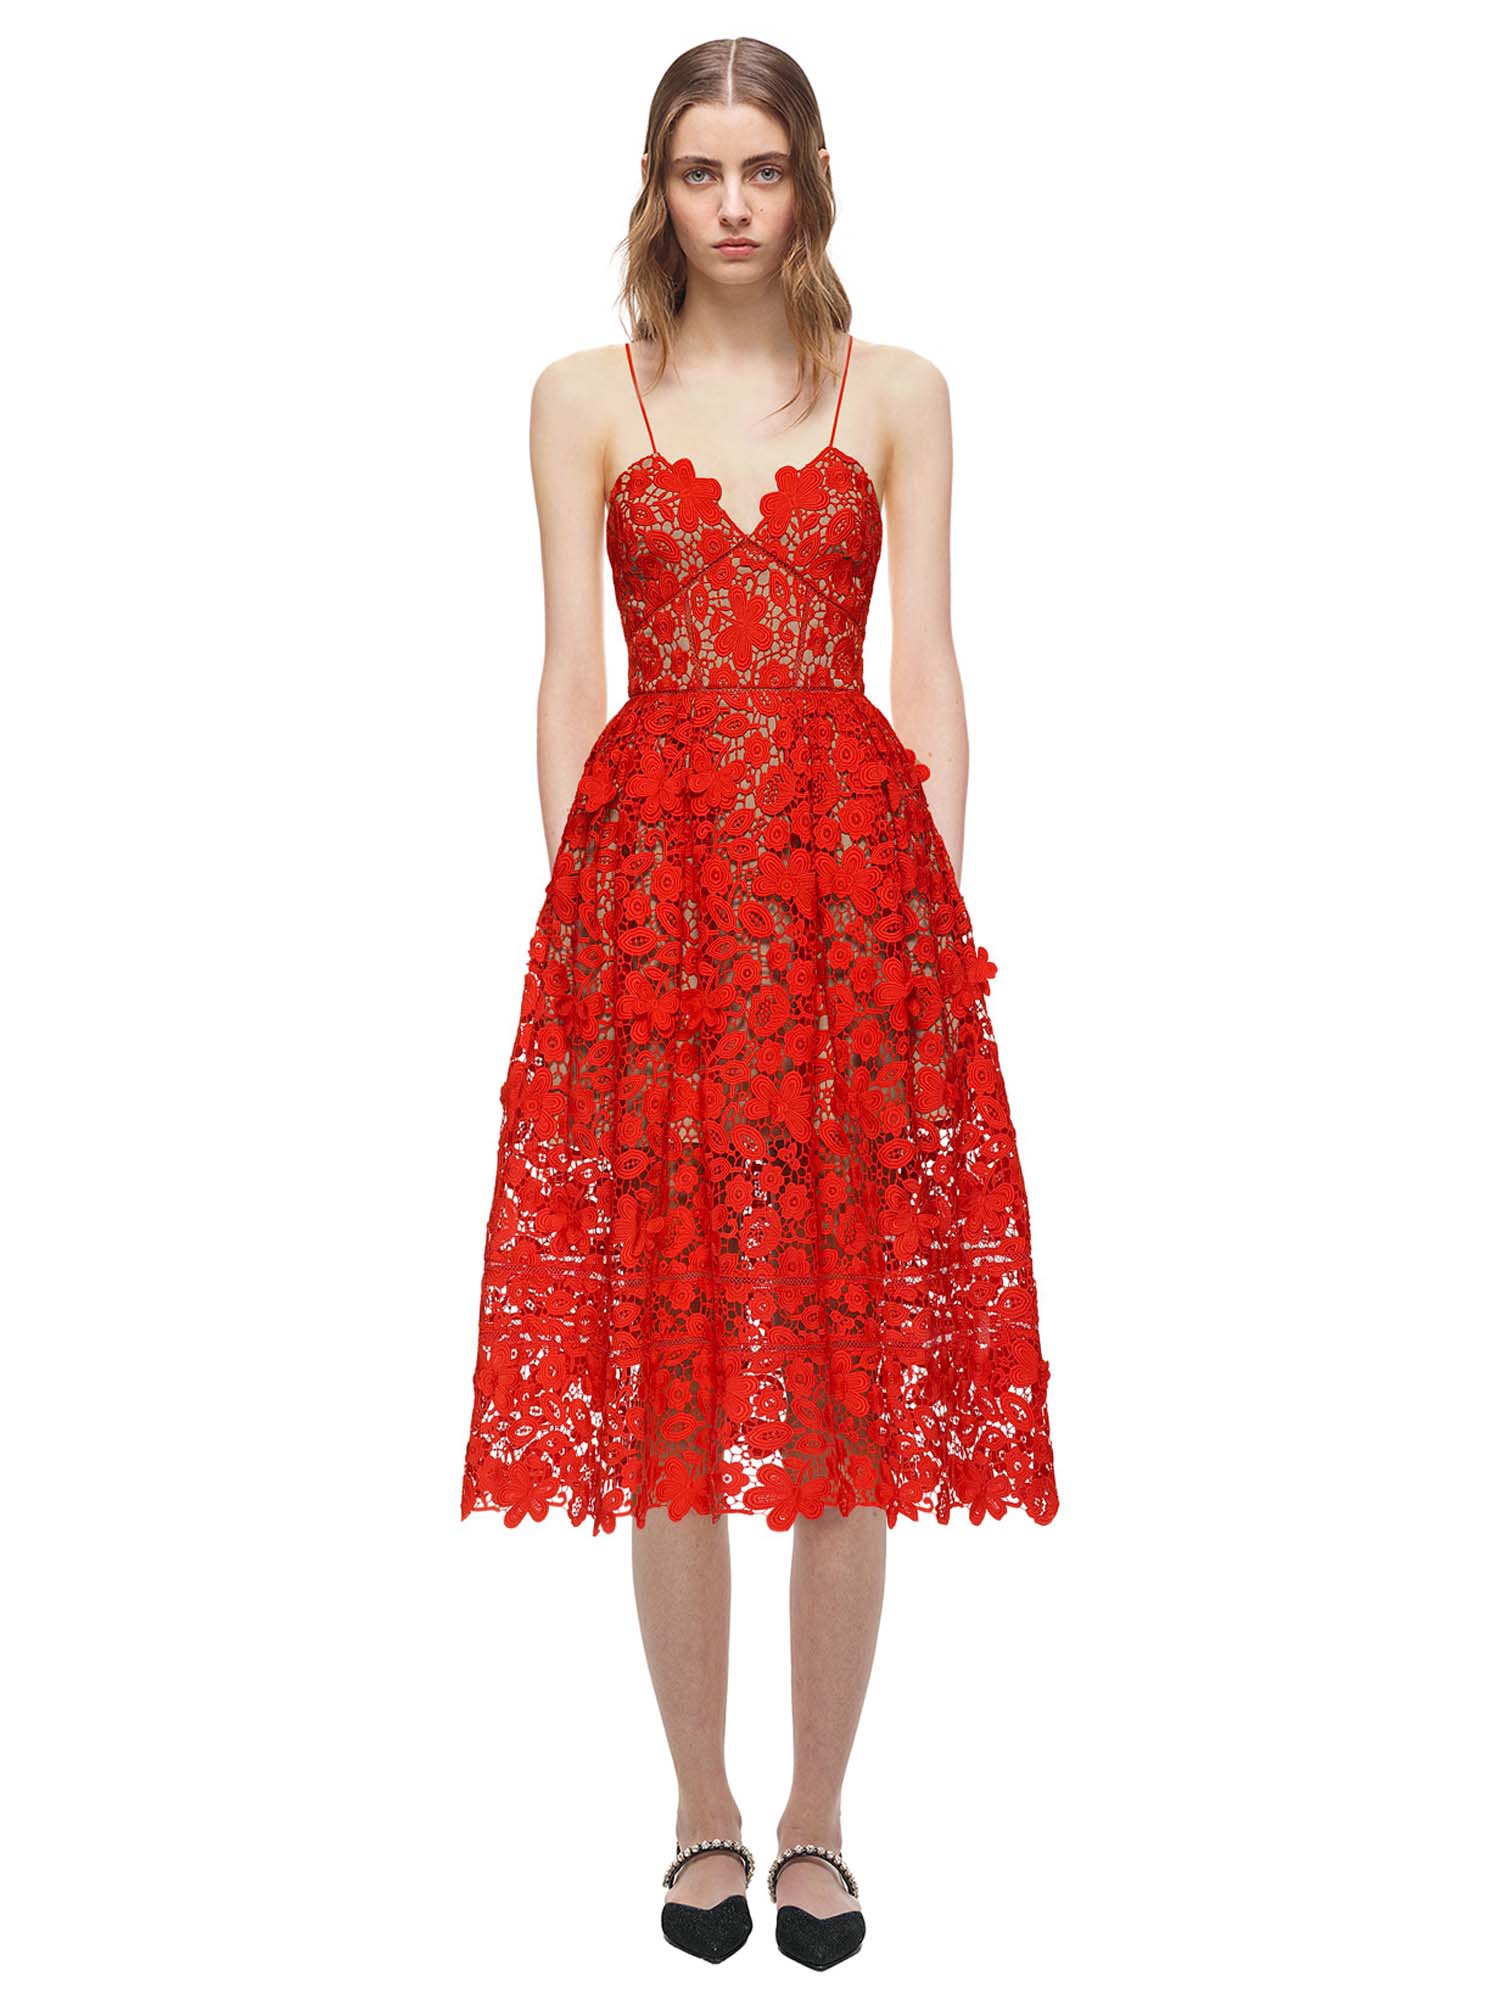 3D Floral Lace Midi Dress in Tomato Red ...